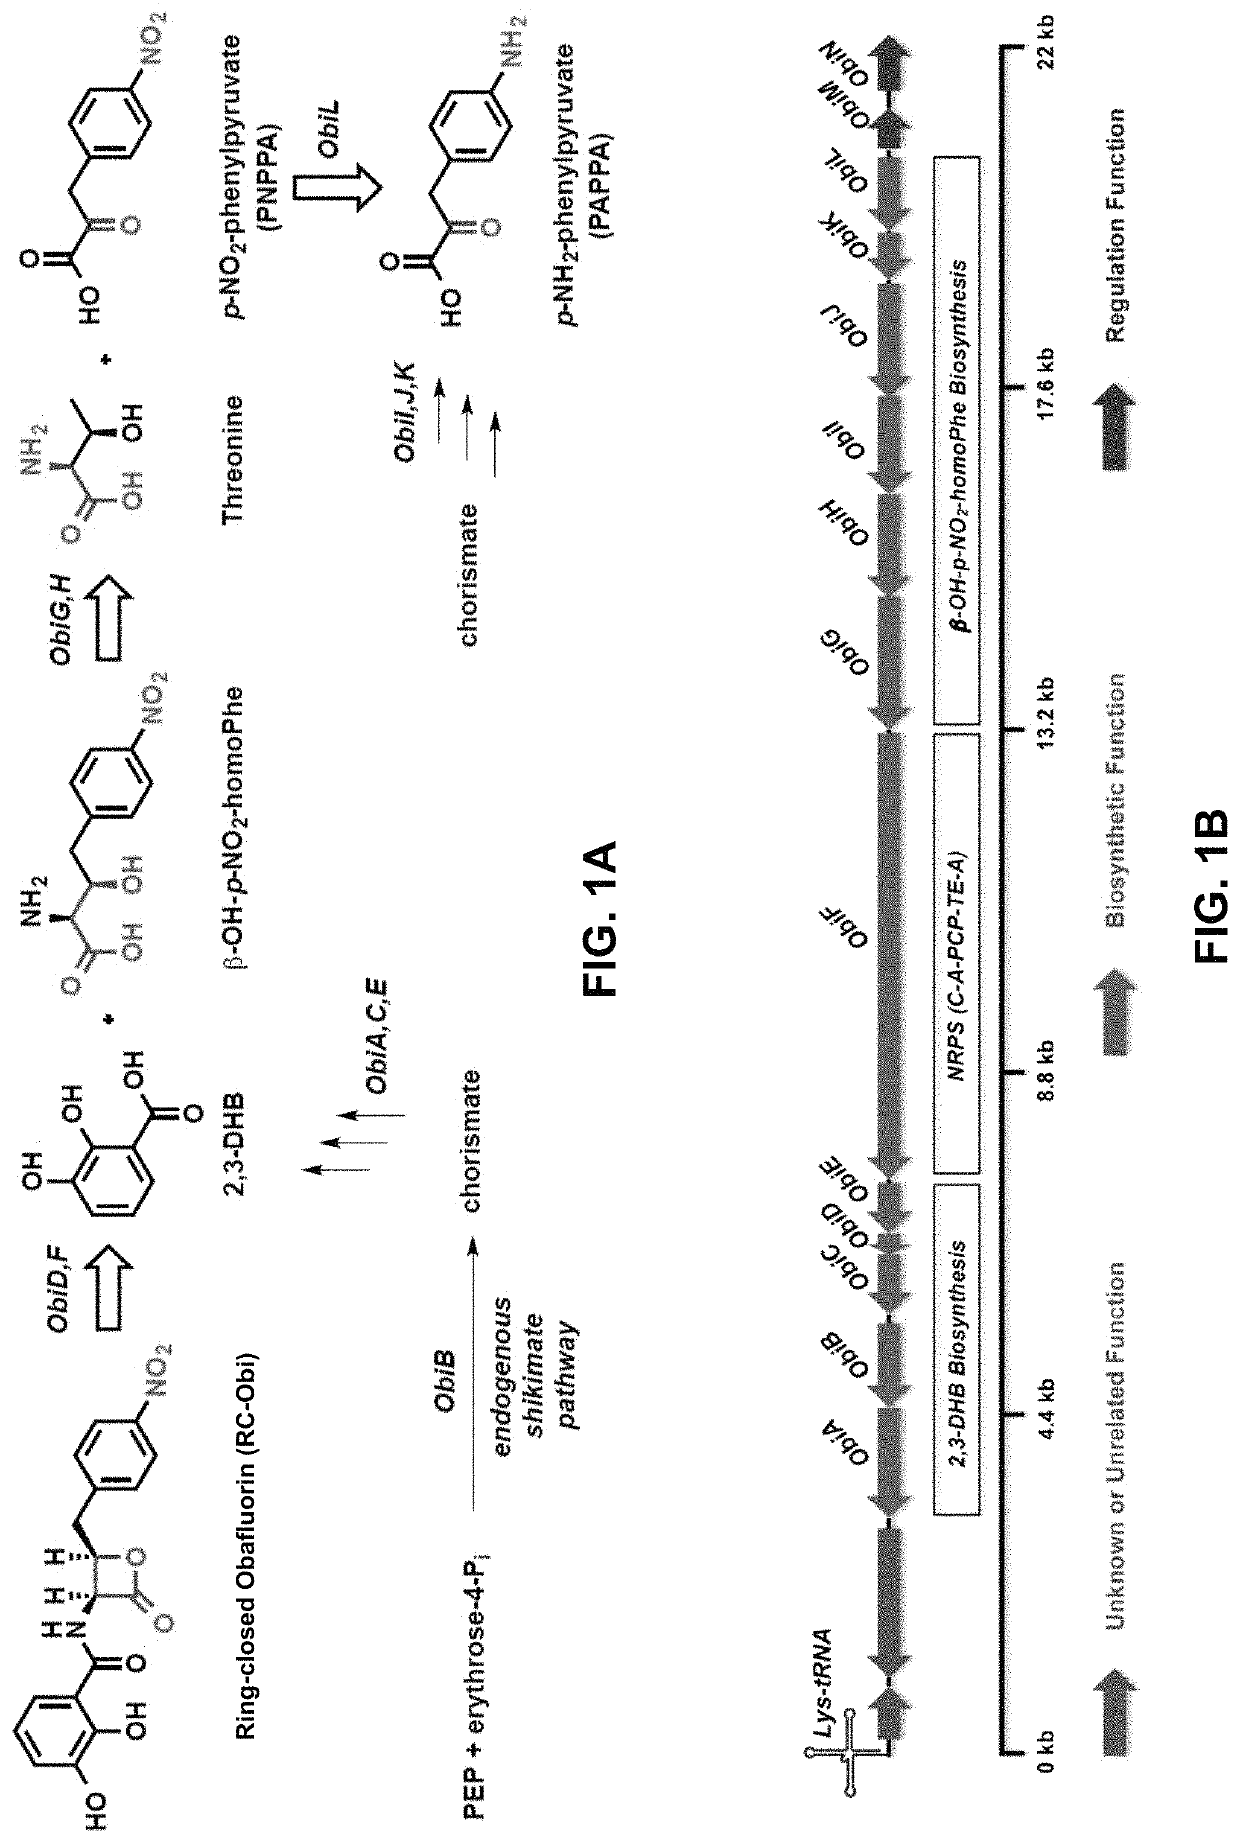 Chemoenzymatic synthesis of peptide beta-lactones and beta-hydroxy acids